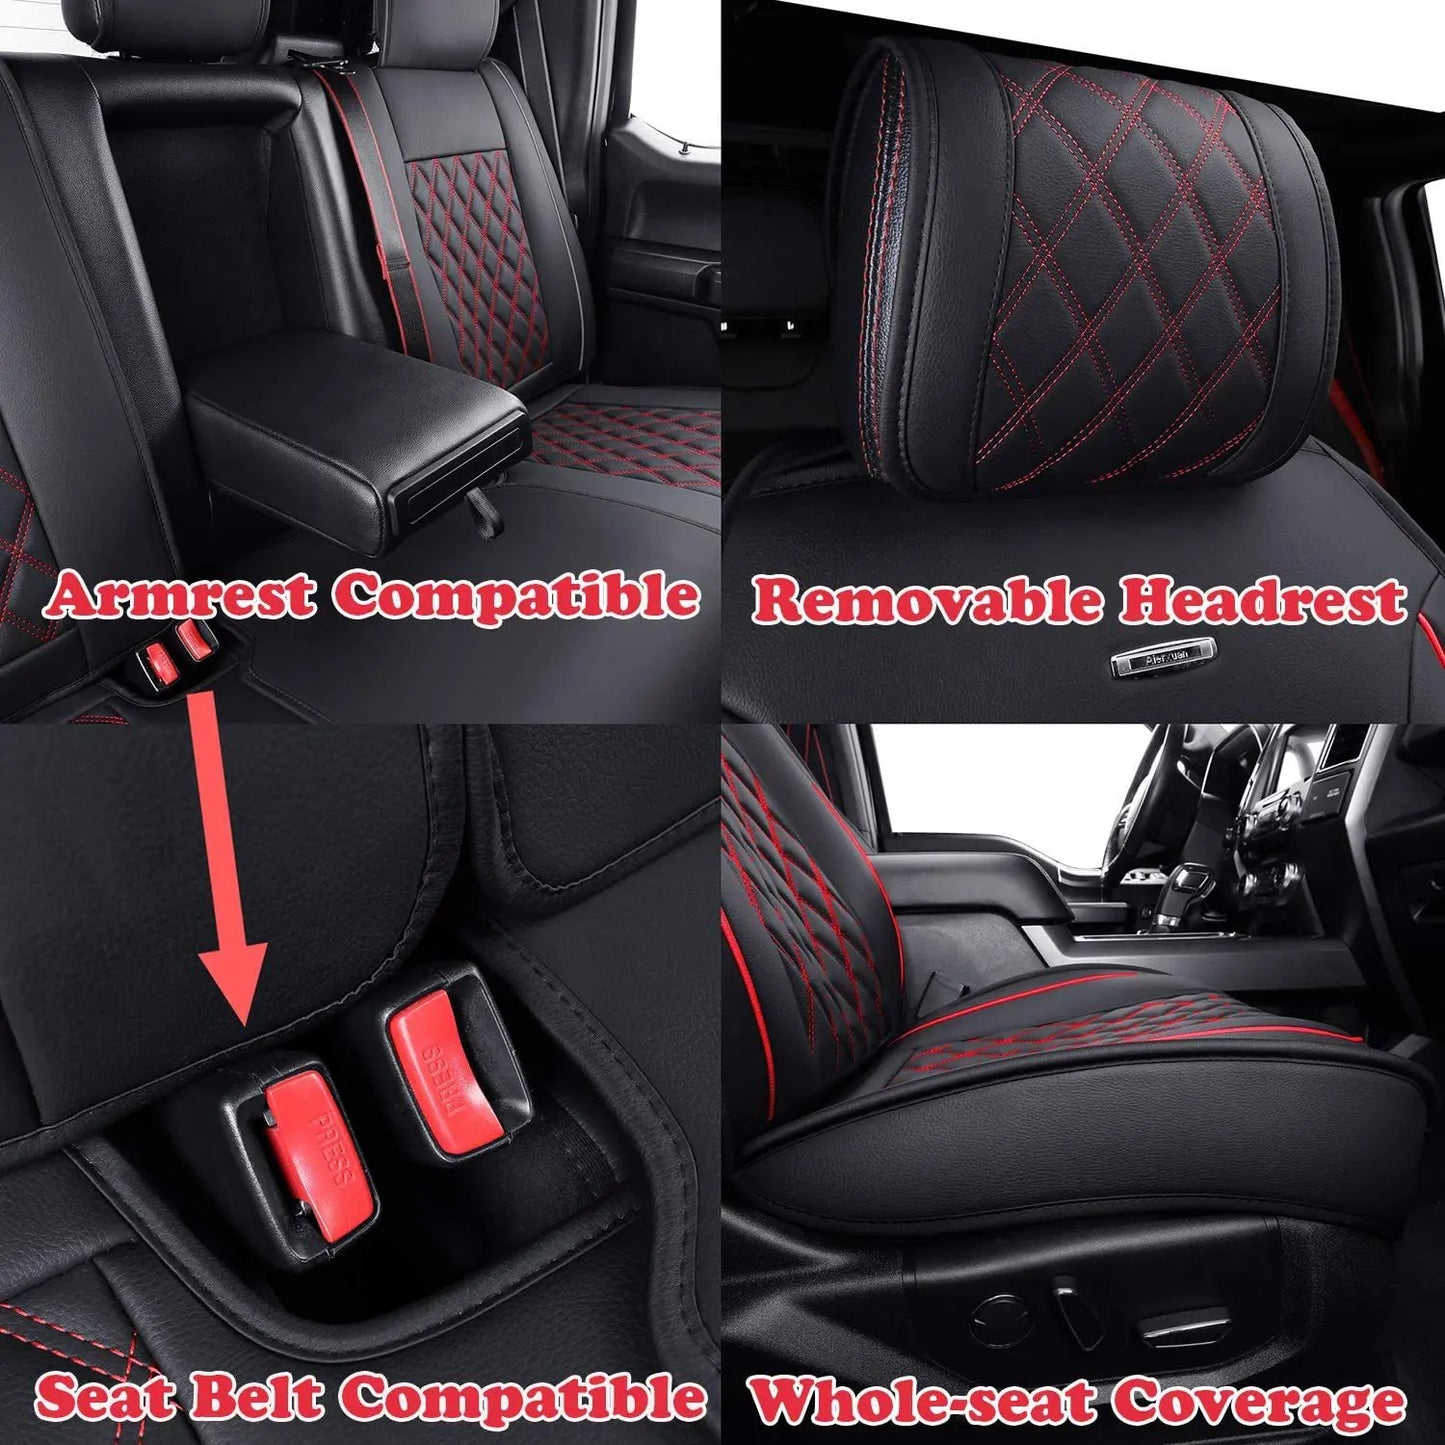 Ford Crew Cab Seat Covers, Full 5 Piece Set